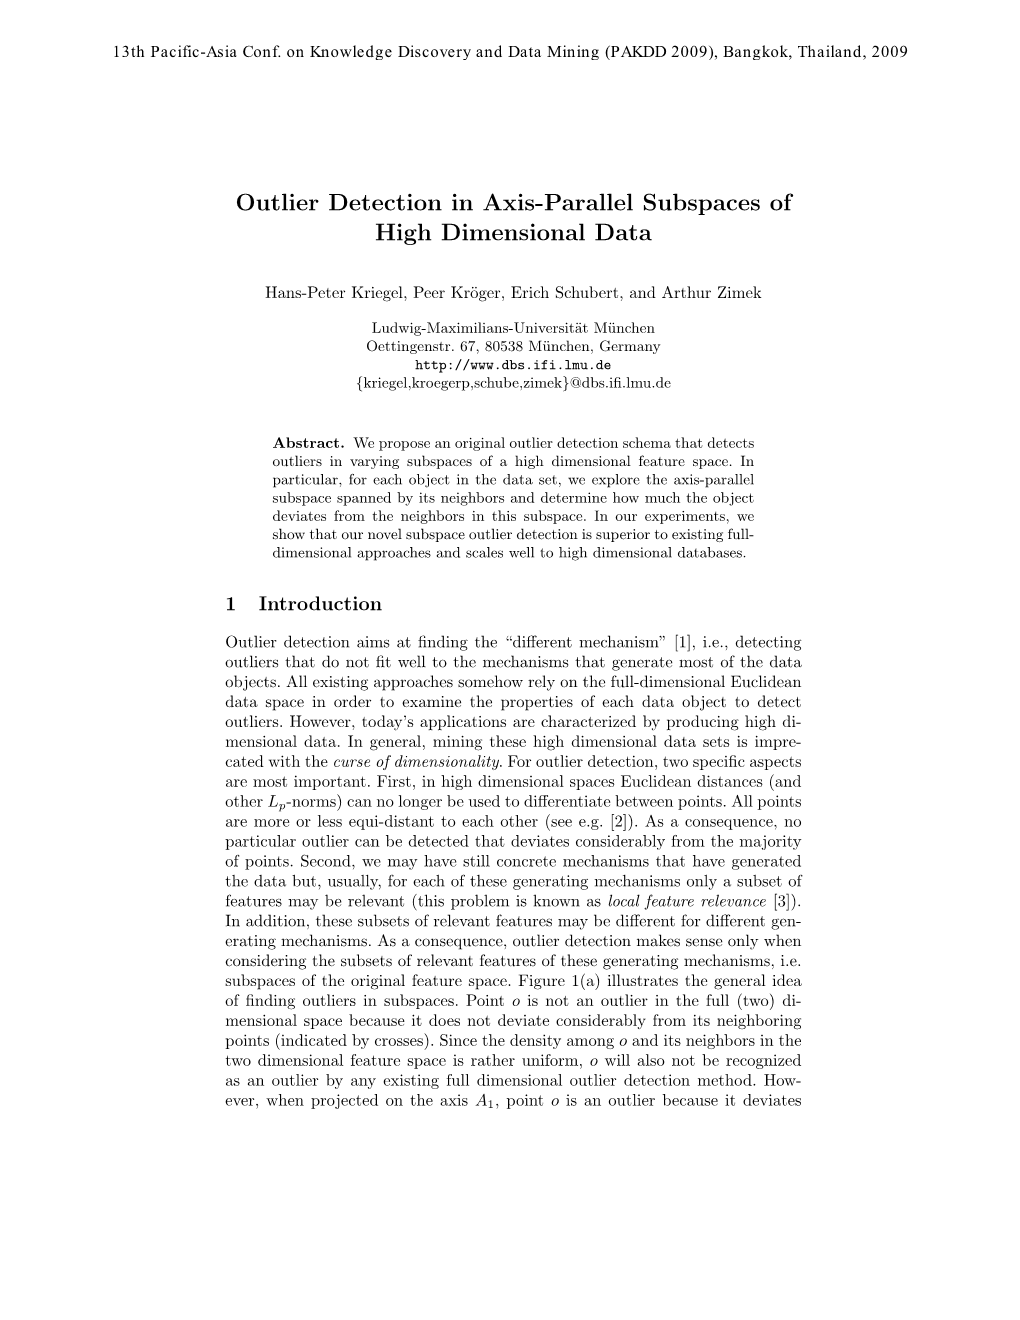 Outlier Detection in Axis-Parallel Subspaces of High Dimensional Data